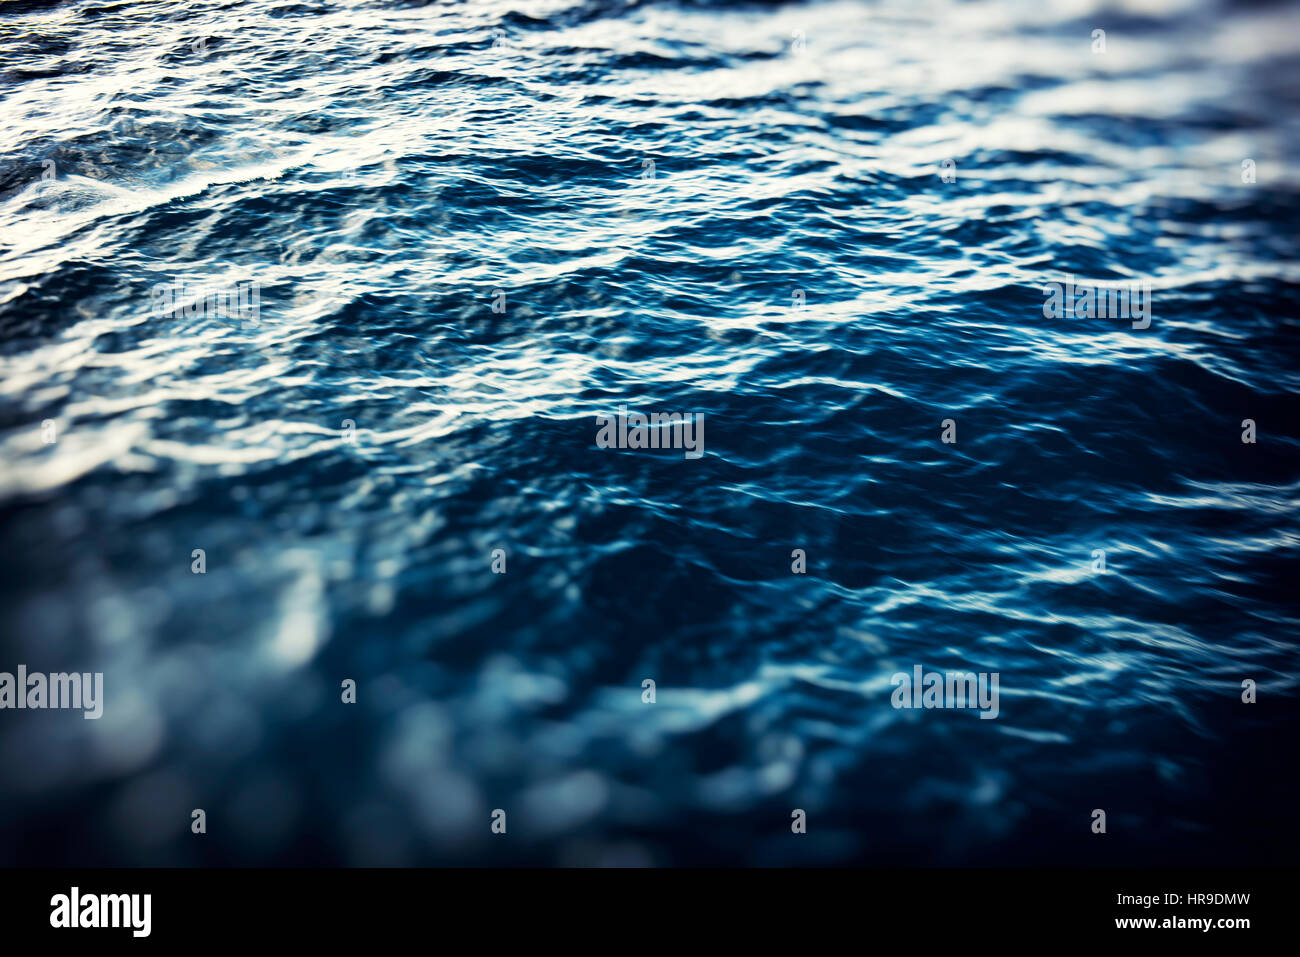 Blurred beautiful abstract dark blue ocean background with lights. blurry wallpaper concept. Stock Photo